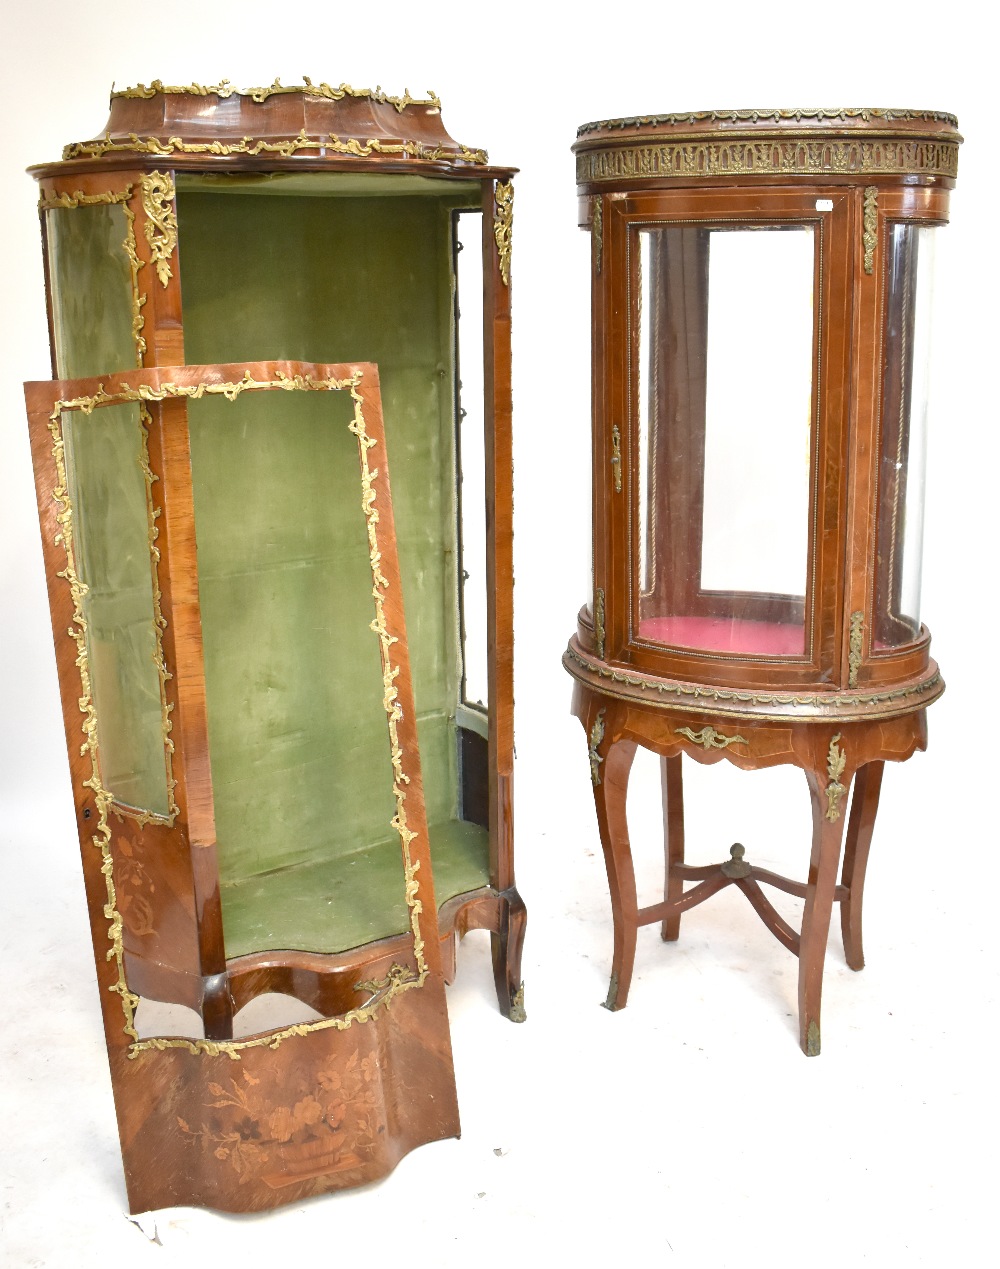 Two late 19th century French vitrines with gilt metal mounts for restoration, the slightly larger of